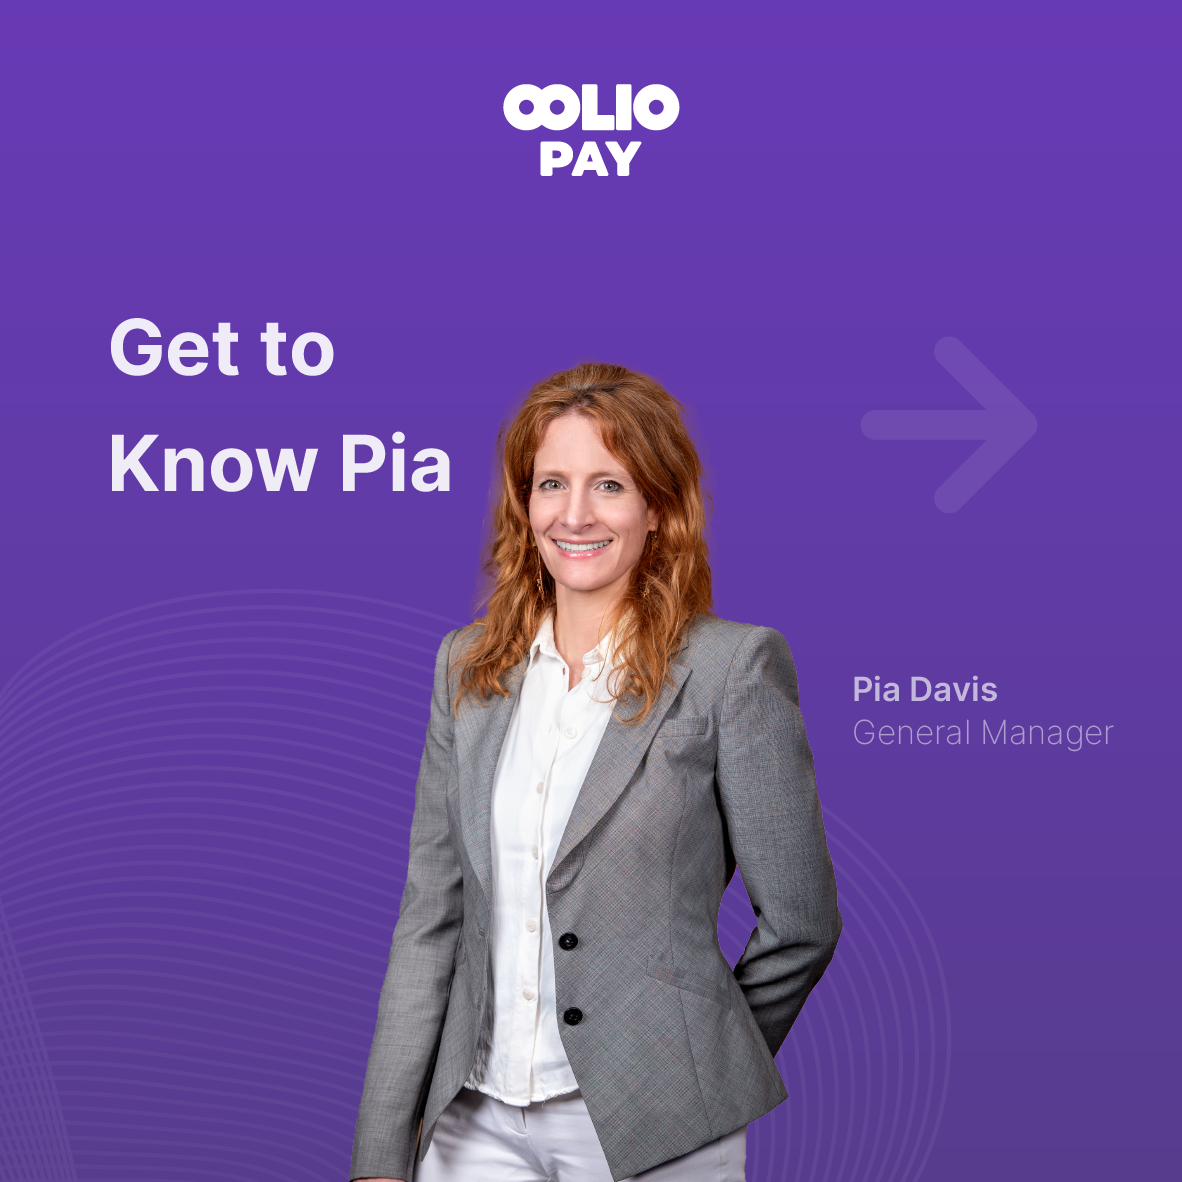 Get to know Pia